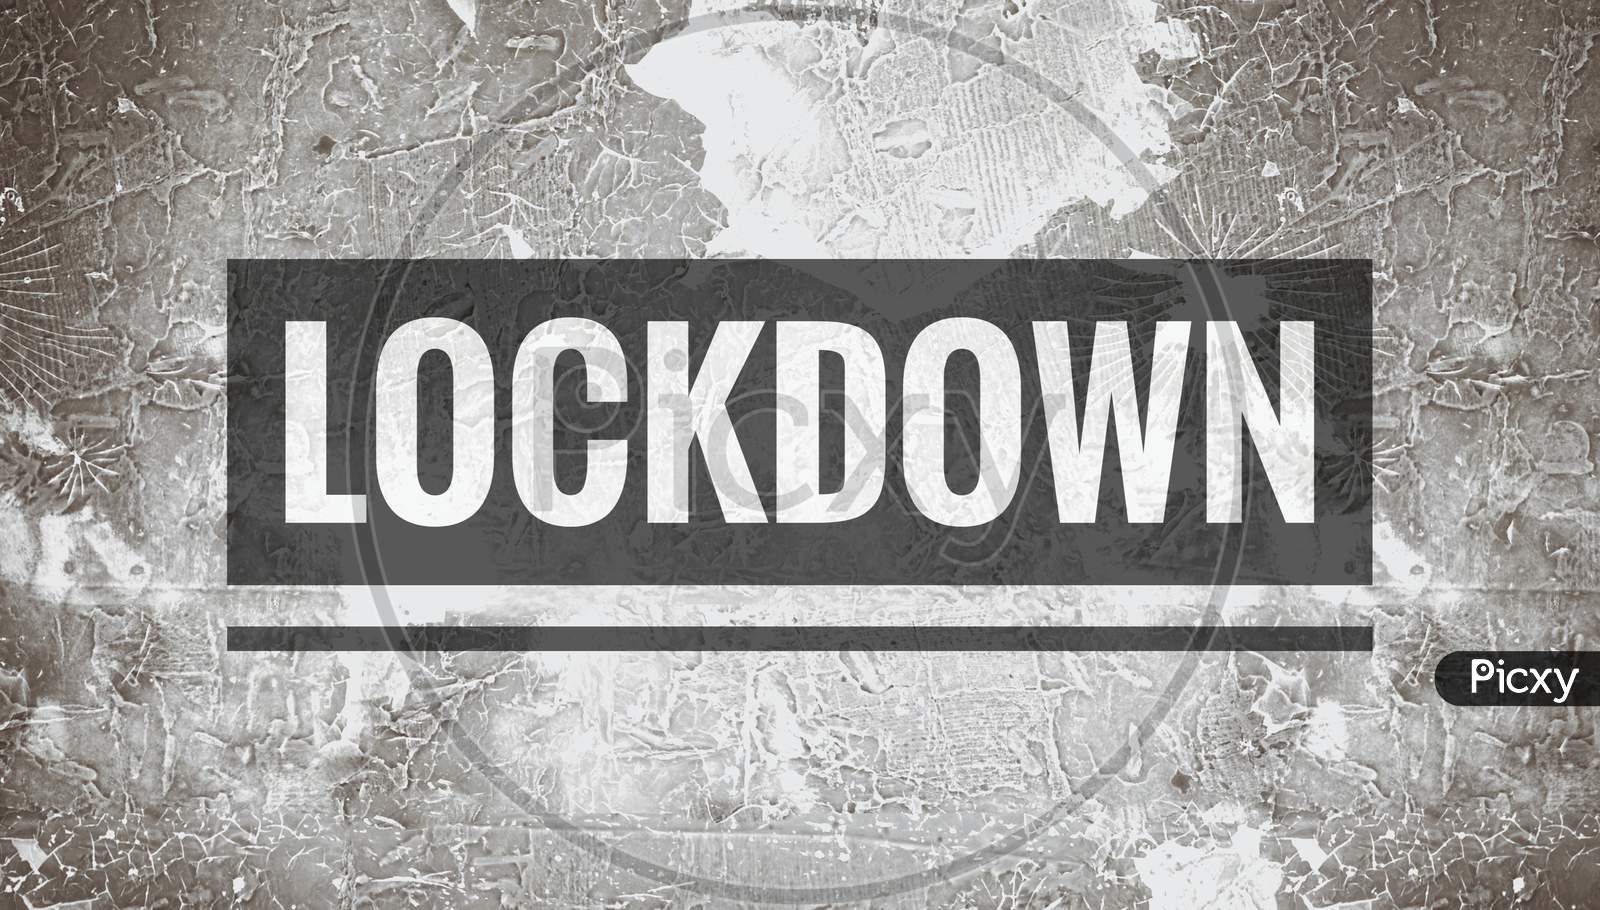 Lockdown world, lockdown text word written in black and white grunge background, home isolation for pandemic situation of corona virus infection of covid19